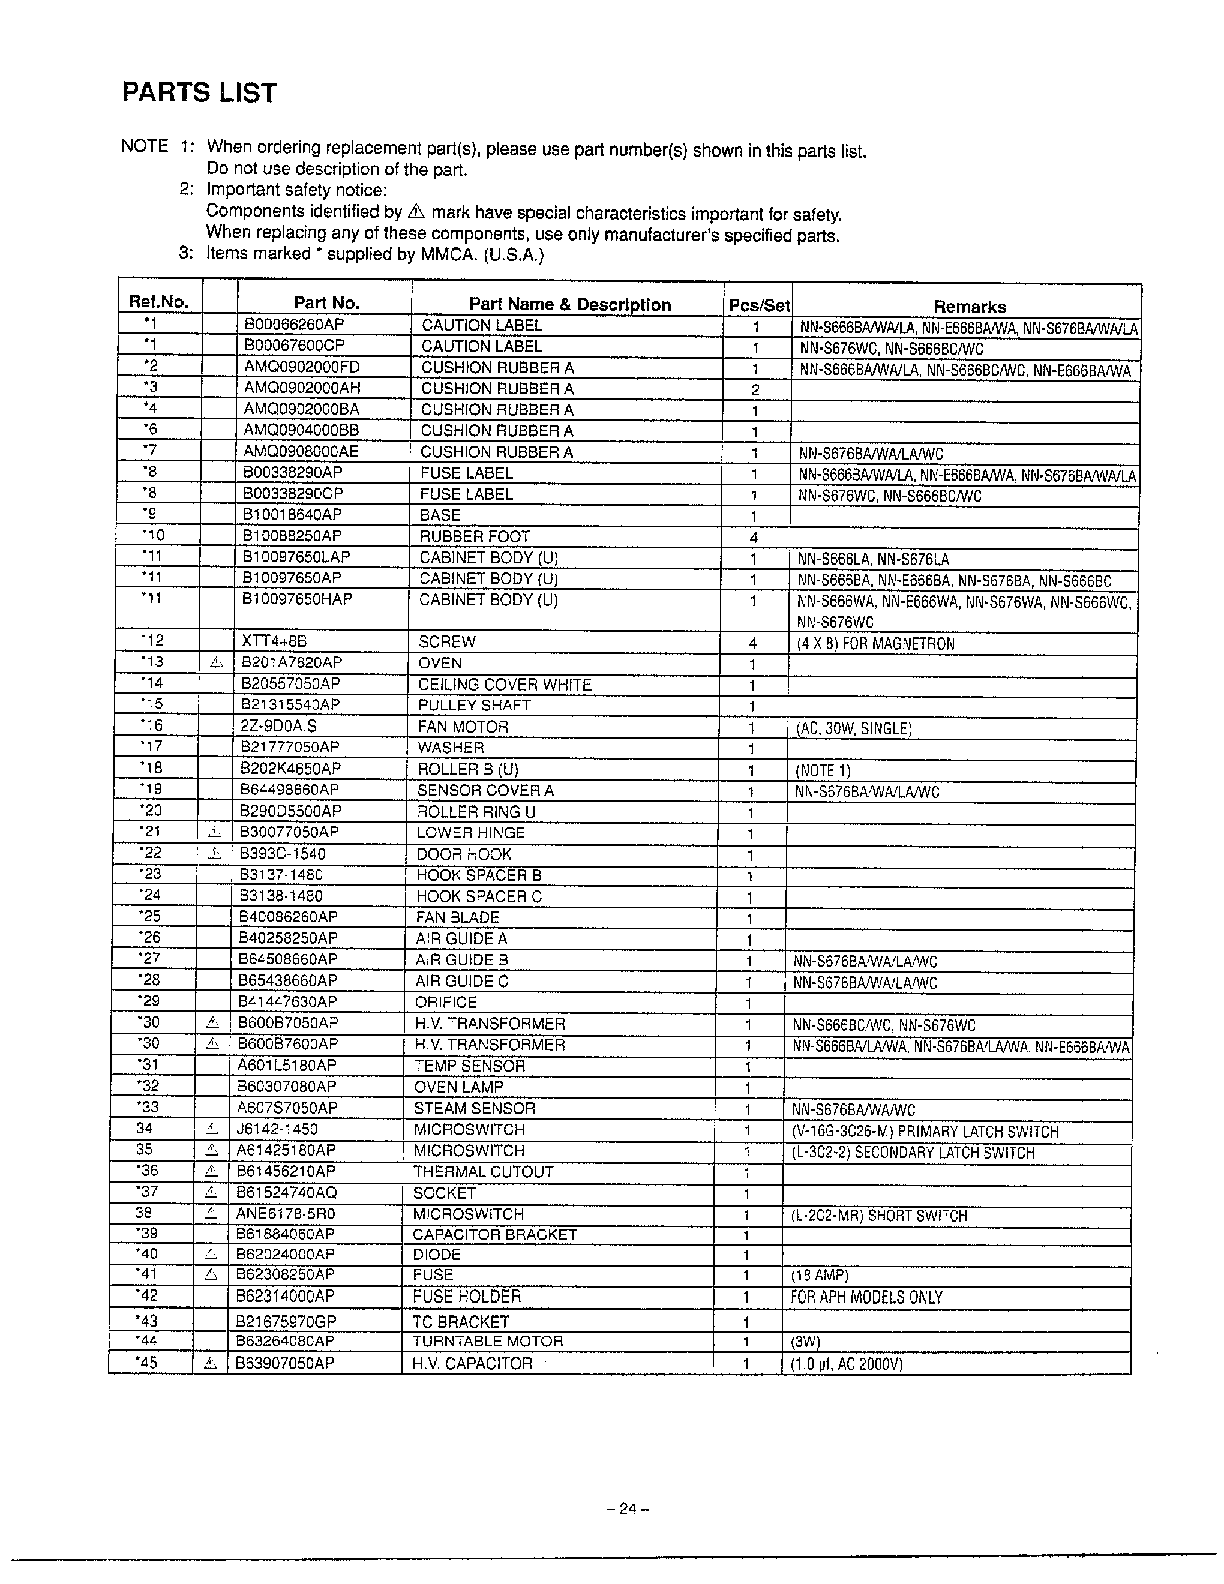 COMPLETE MICROWAVE Page 2 Diagram & Parts List for Model nns666ba